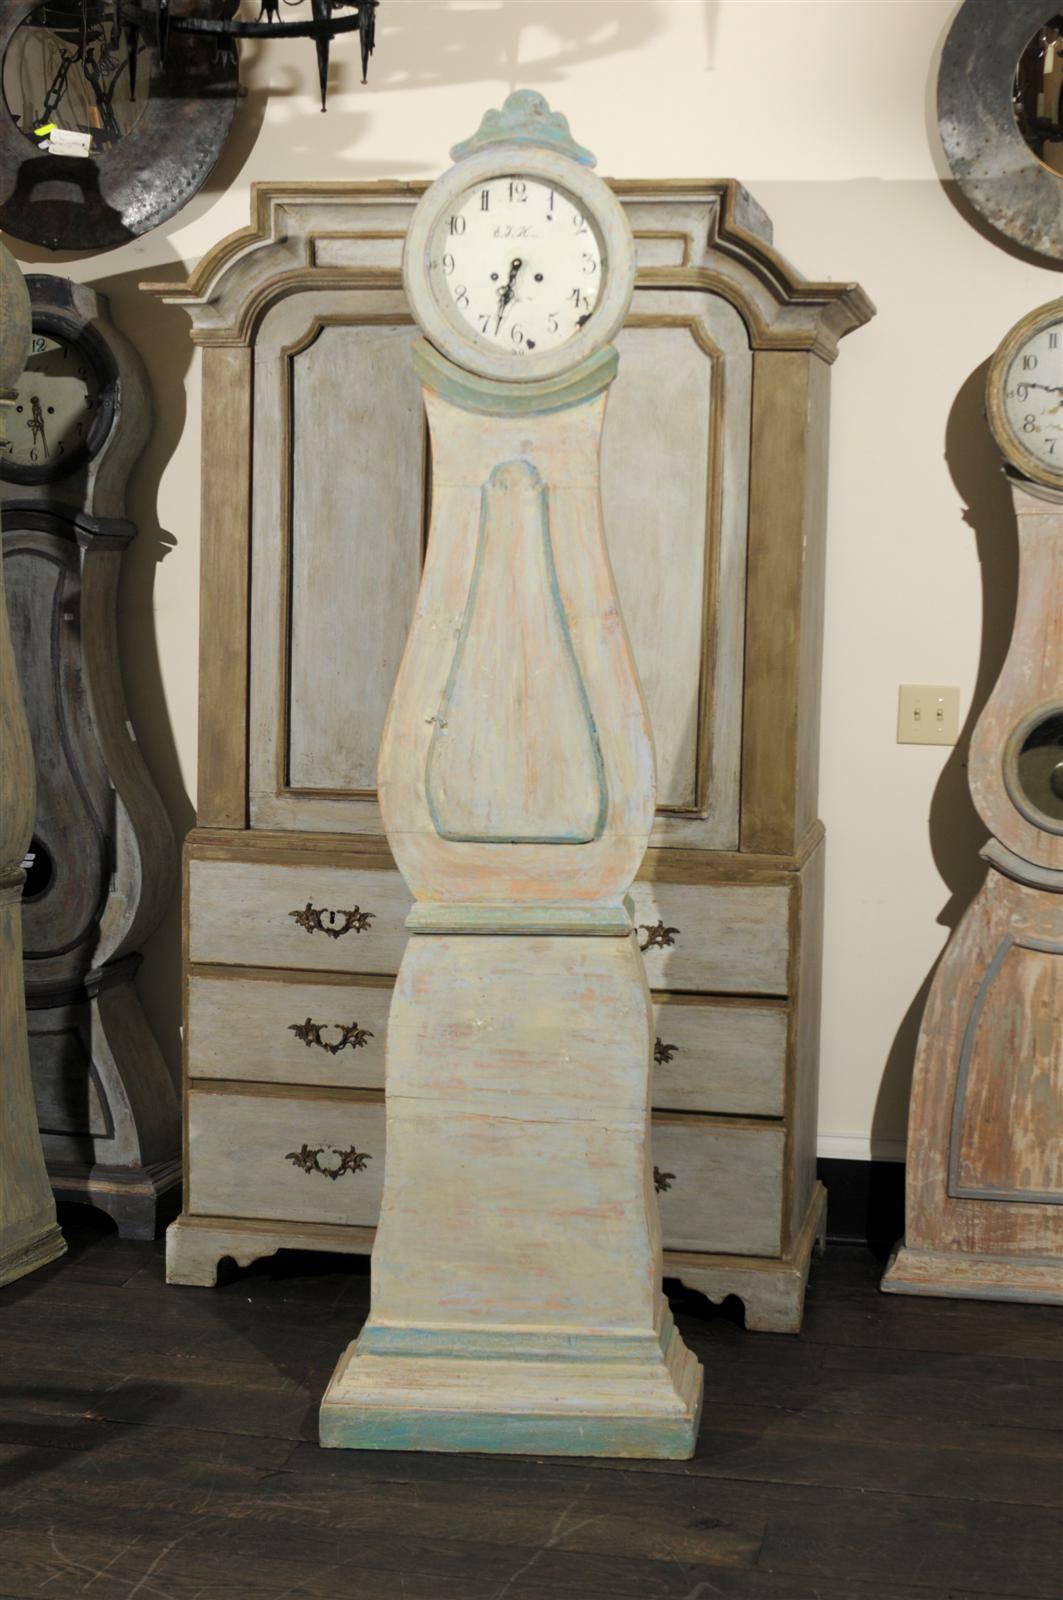 A Swedish 19th century painted wood Mora clock.  This Swedish clock is made of various tones, such as light grey with some wood coming through and green accents in the trim and crest.  The Mora clock stands out with the simplicity of its lines and